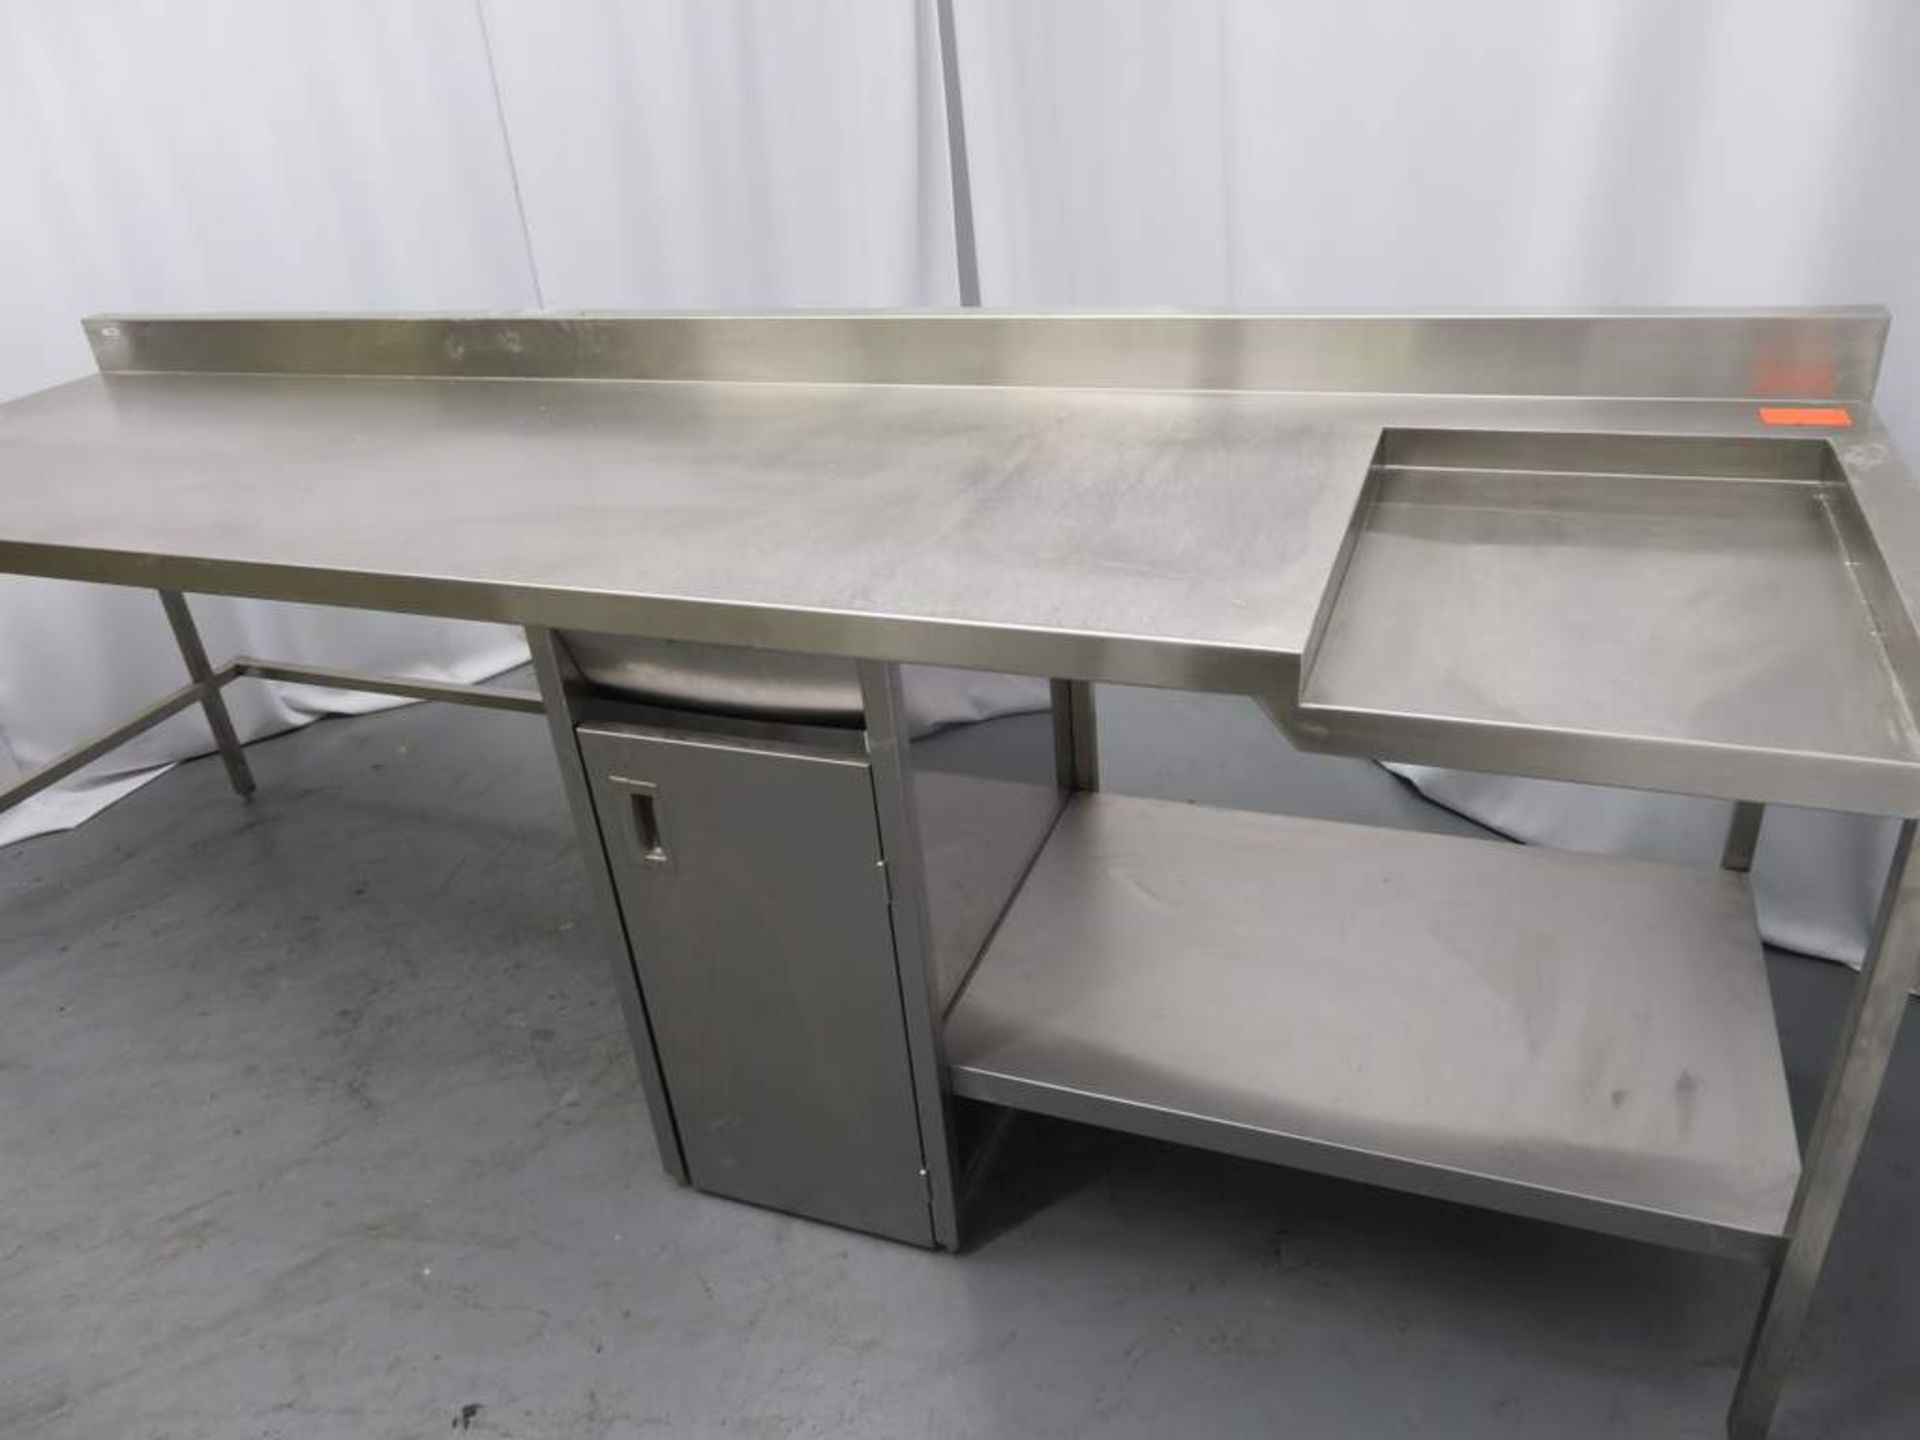 Stainless Steel Multi Purpose Prep Worktable. Dimensions: 2900x800x1200mm (LxWxH) - Image 4 of 7